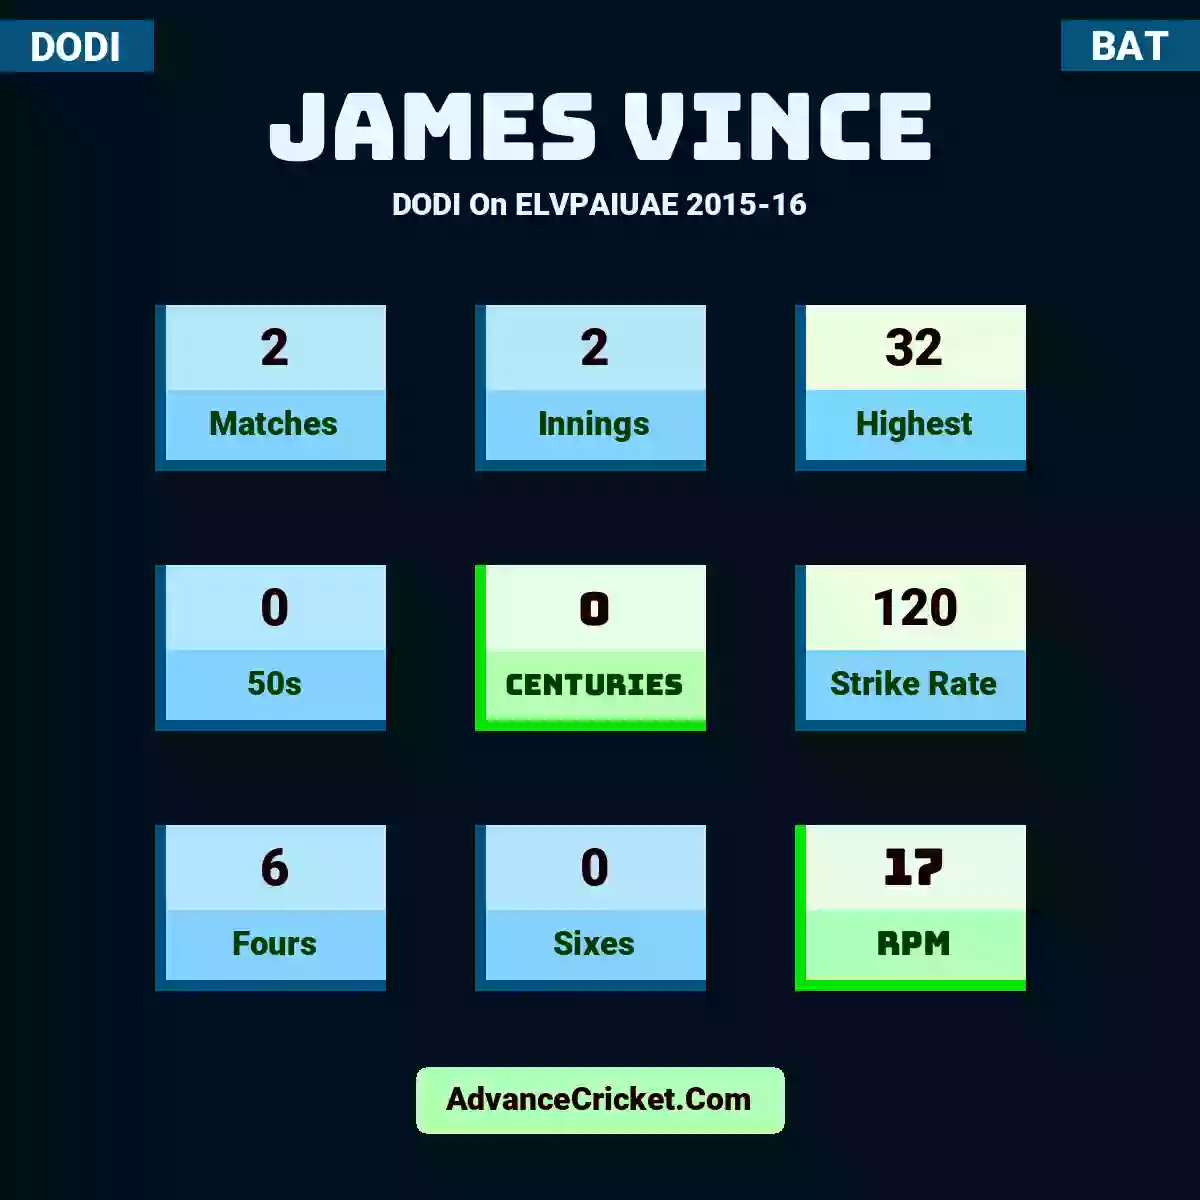 James Vince DODI  On ELVPAIUAE 2015-16, James Vince played 2 matches, scored 32 runs as highest, 0 half-centuries, and 0 centuries, with a strike rate of 120. J.Vince hit 6 fours and 0 sixes, with an RPM of 17.